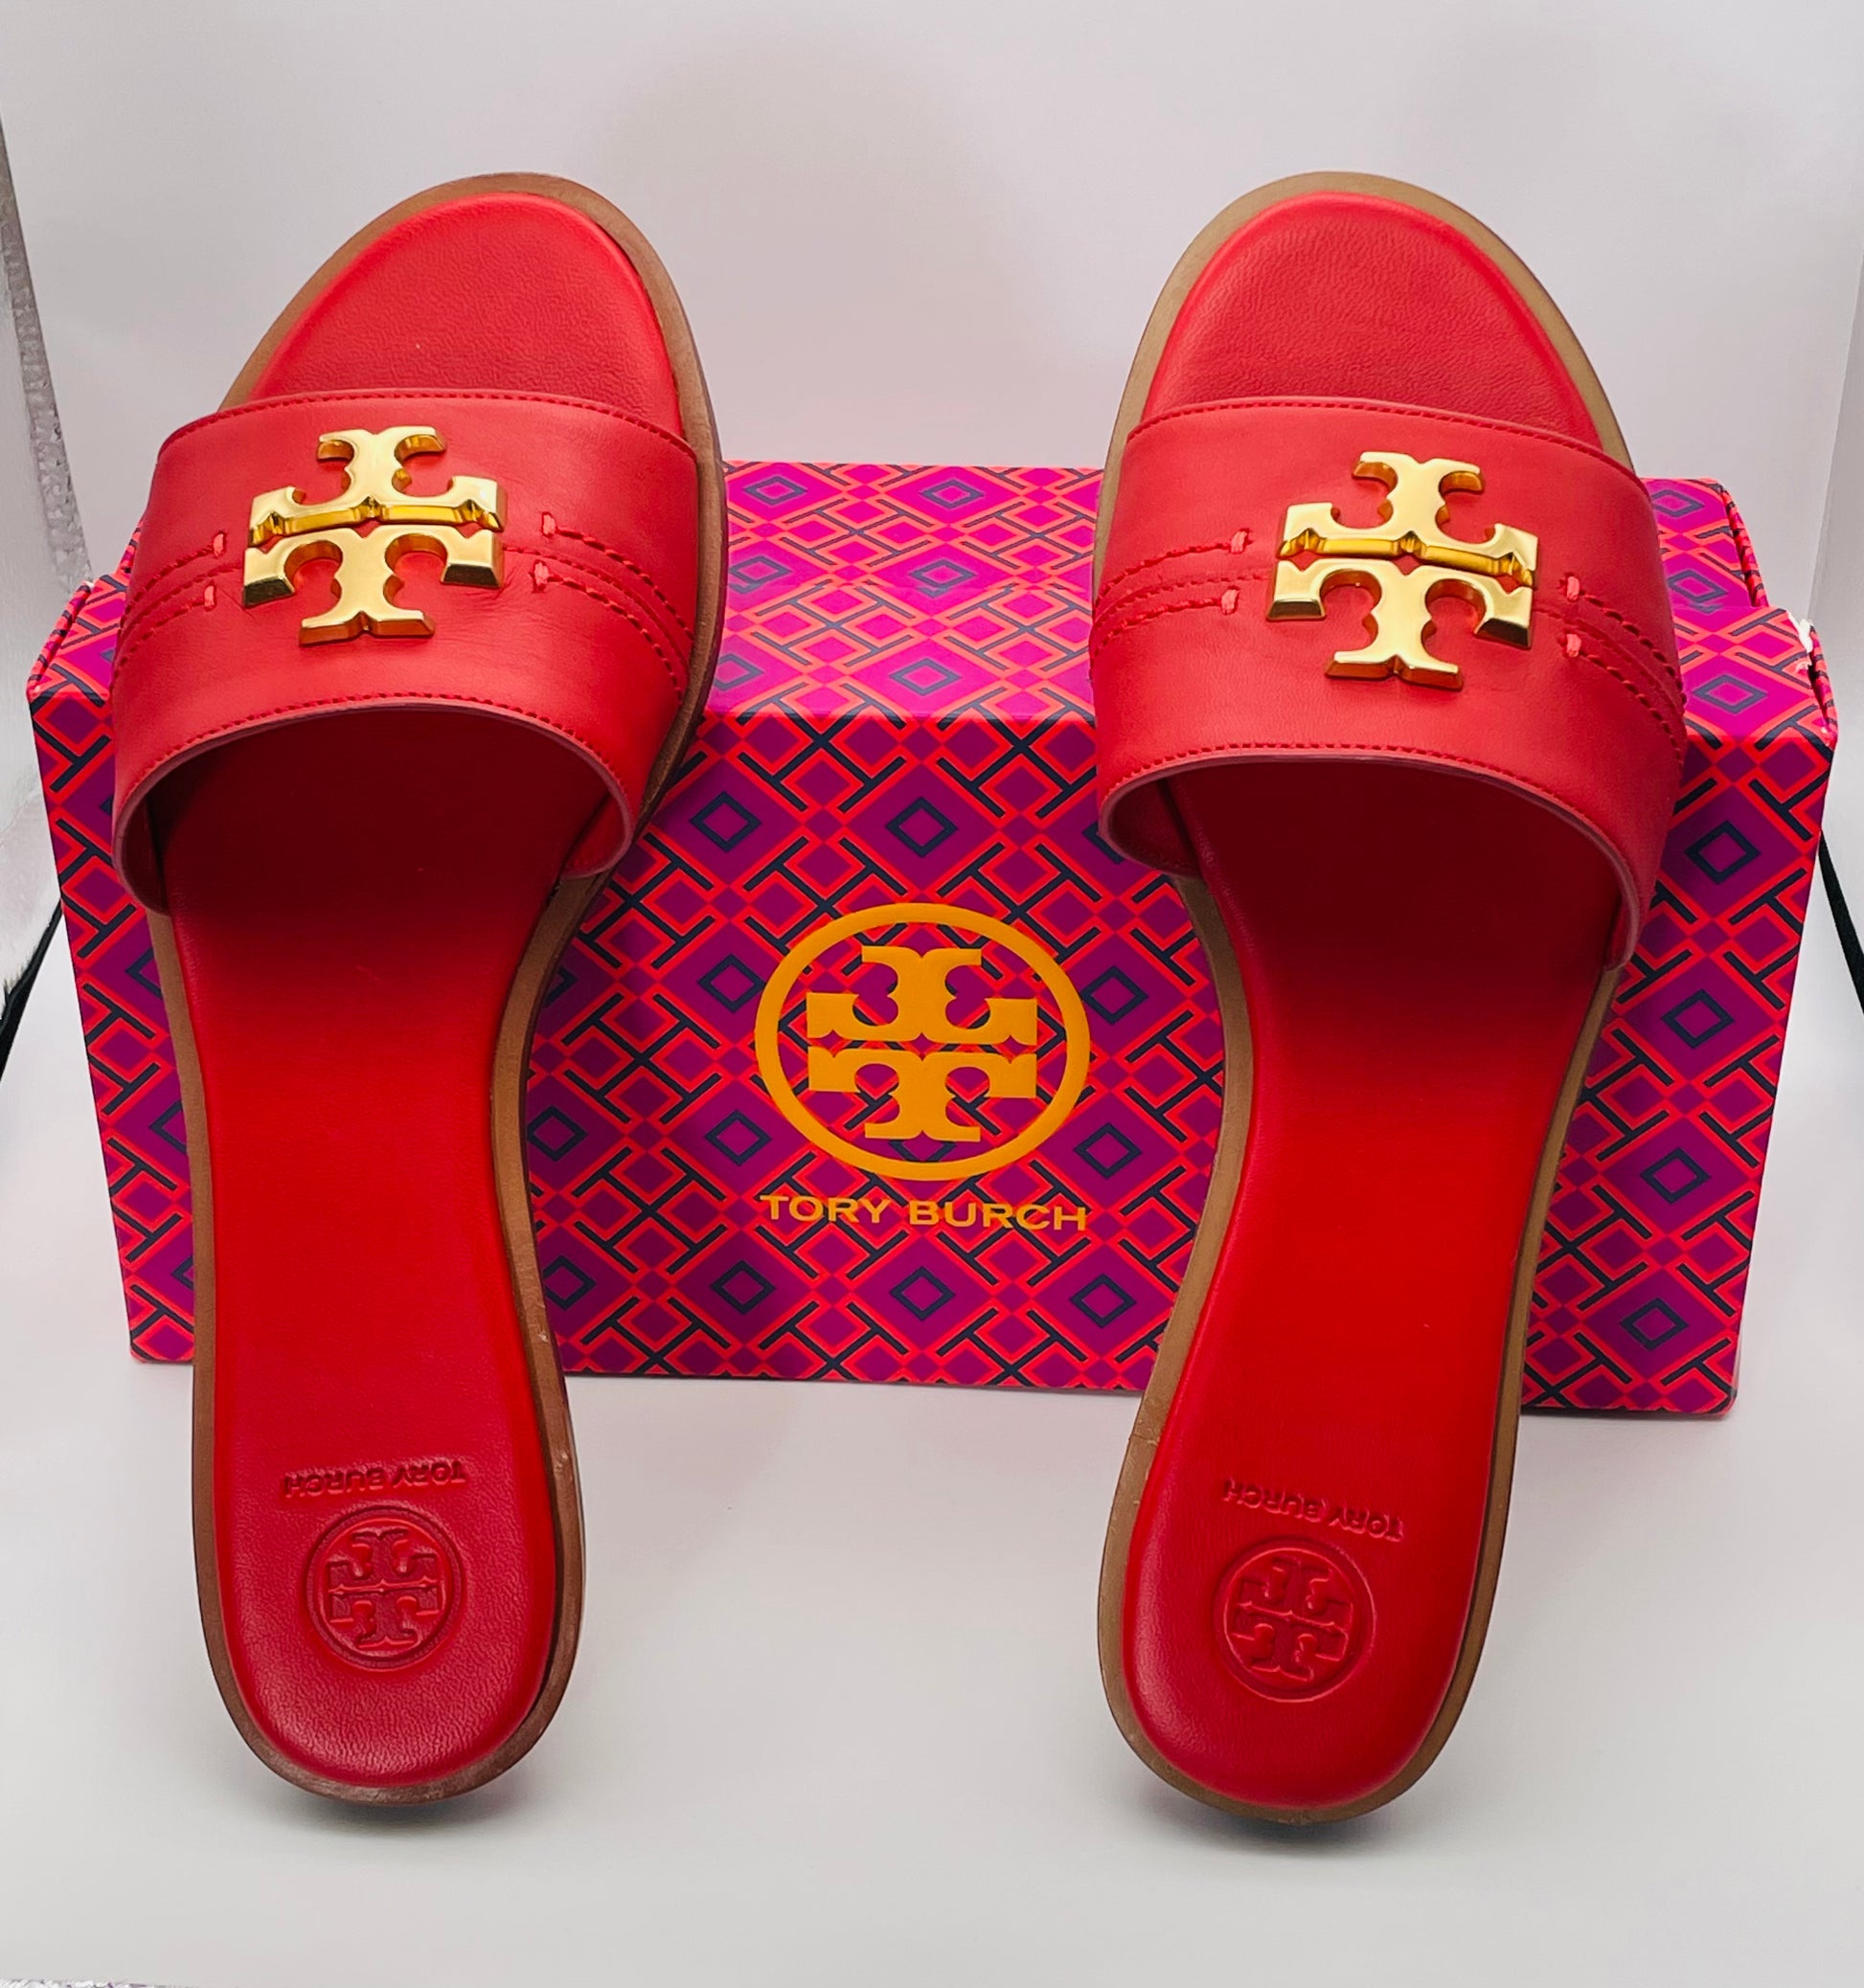 NEW Tory Burch EVERLY SLIDE Sandals Brilliant Red – Fabulous Find